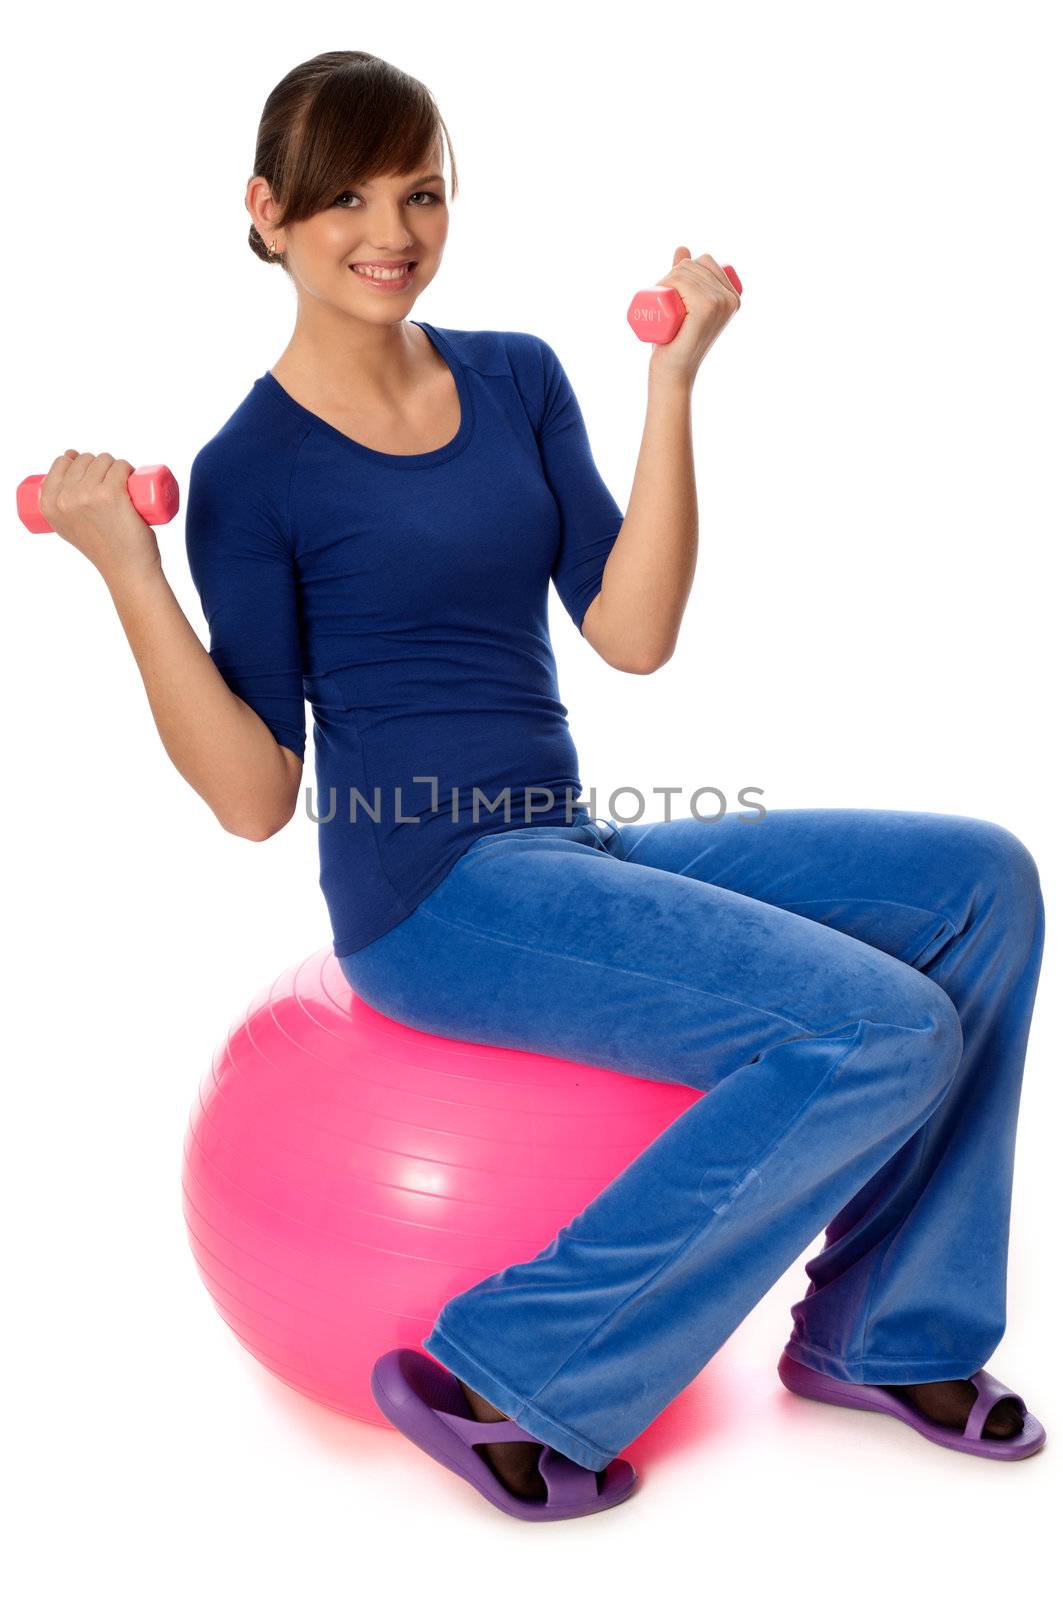 Exercises with dumbbells on a gymnastic ball by merzavka